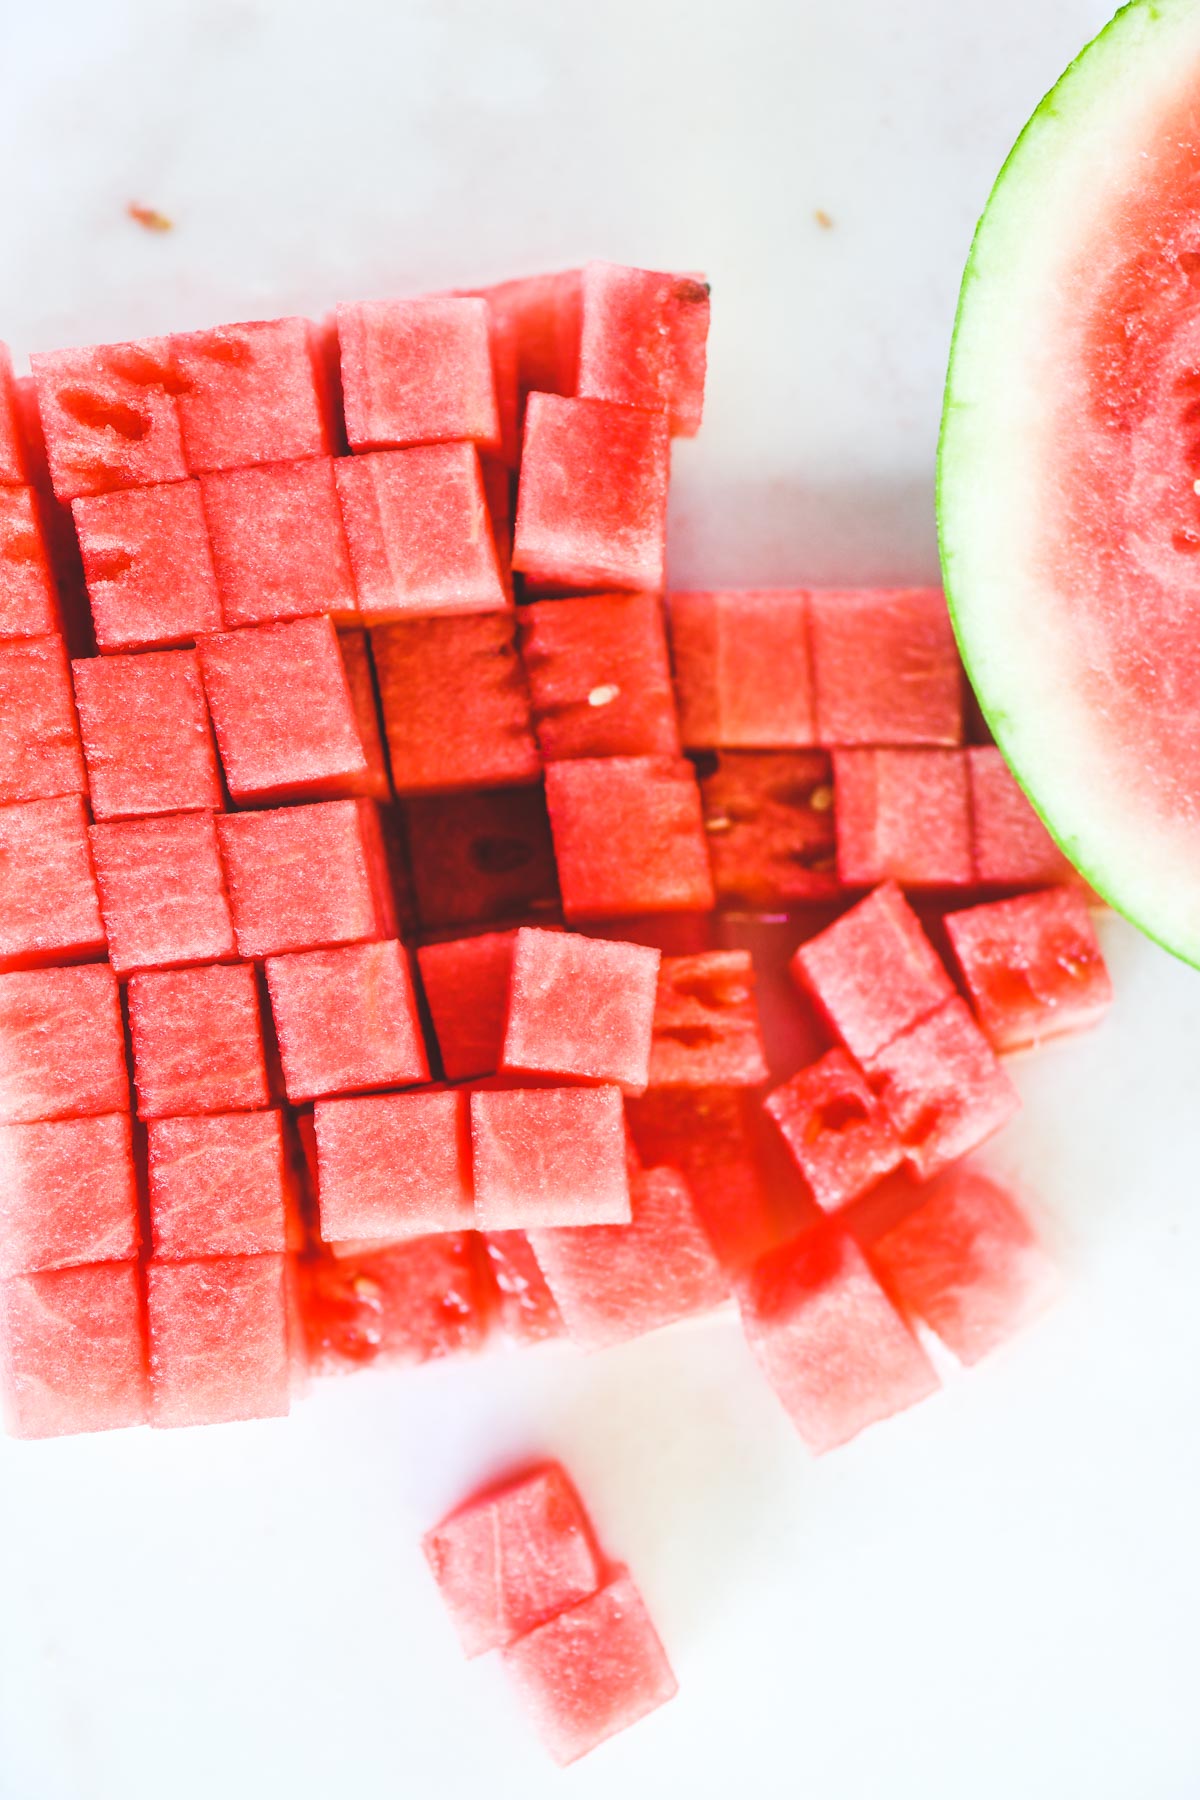 watermelon, cubed